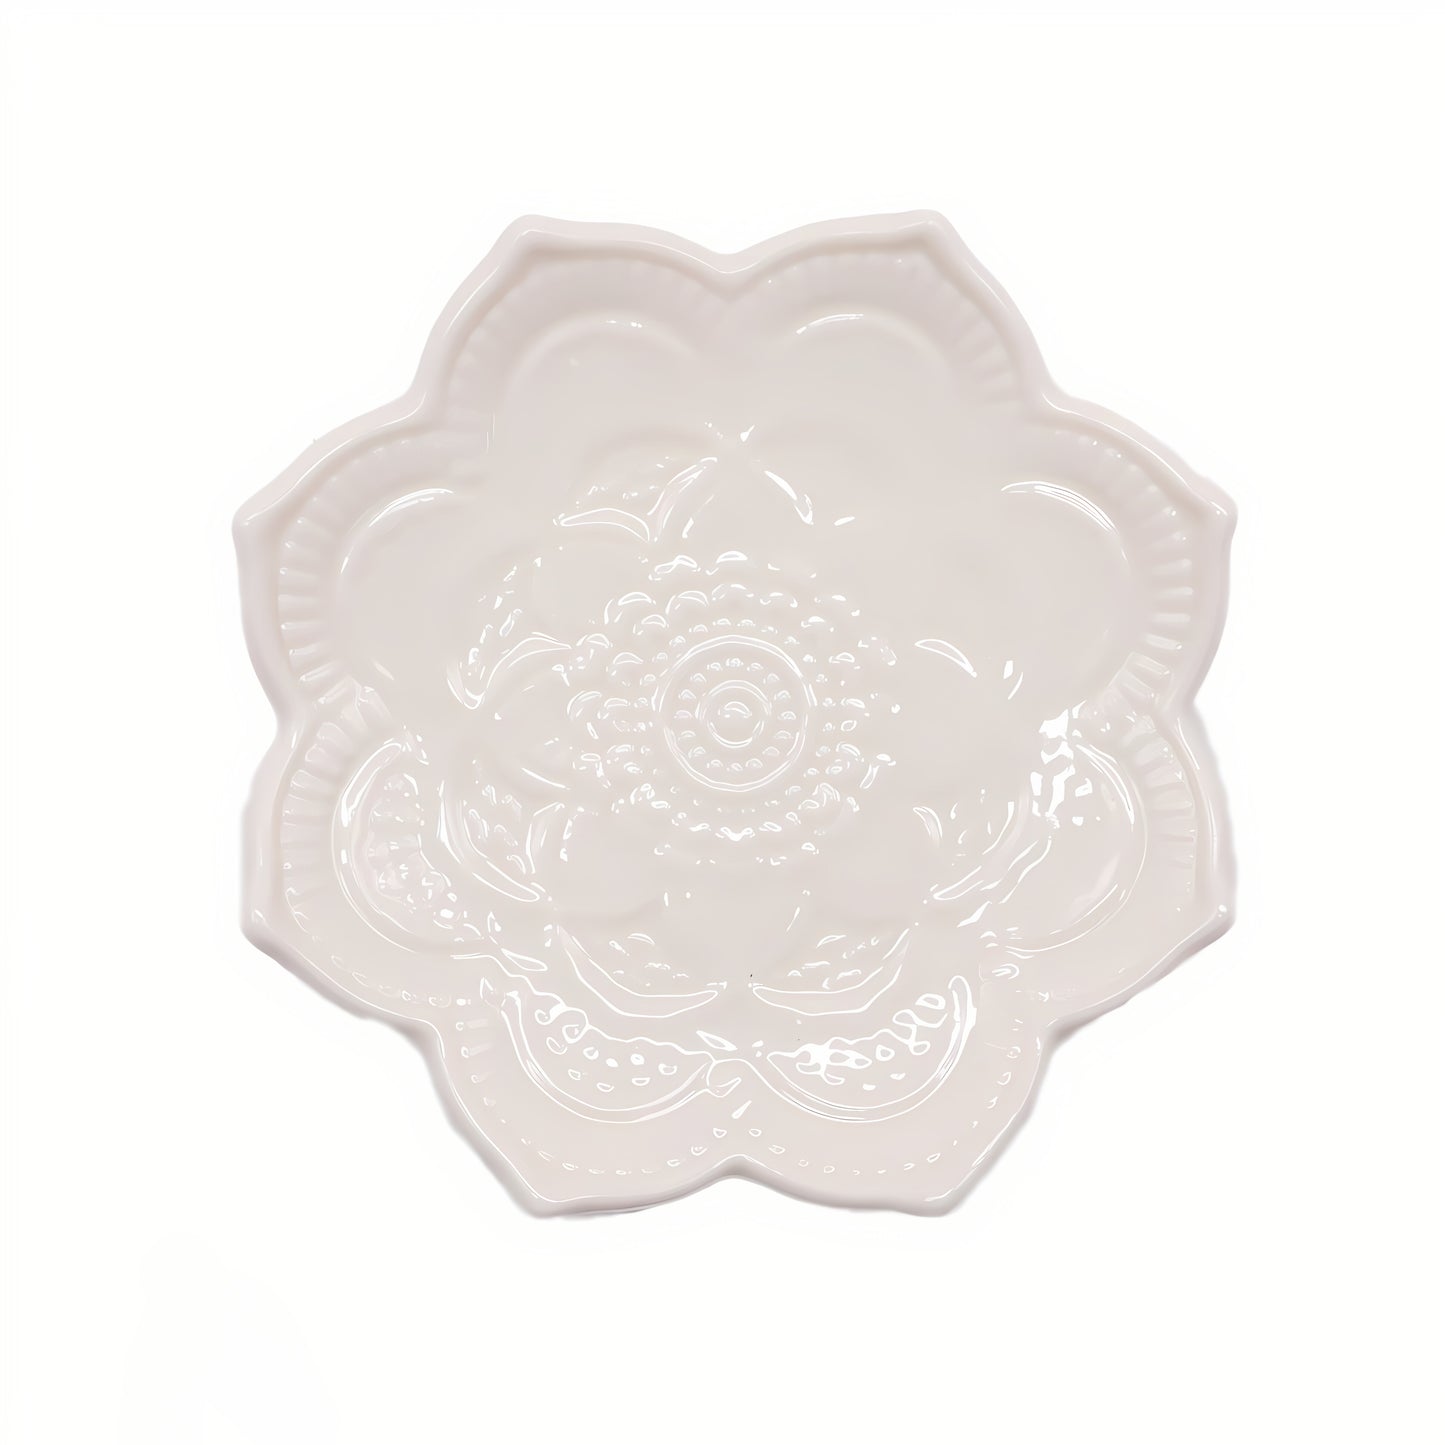 Gilded Lotus Mantra Plate, 3.94 x 0.59 x 3.94 Inches, Ceramic Ring Jewelry Tray Desktop Jewelry Organizer Dish, Valentine's Day Gift for Women, Romantic Birthday Present for Loved Ones